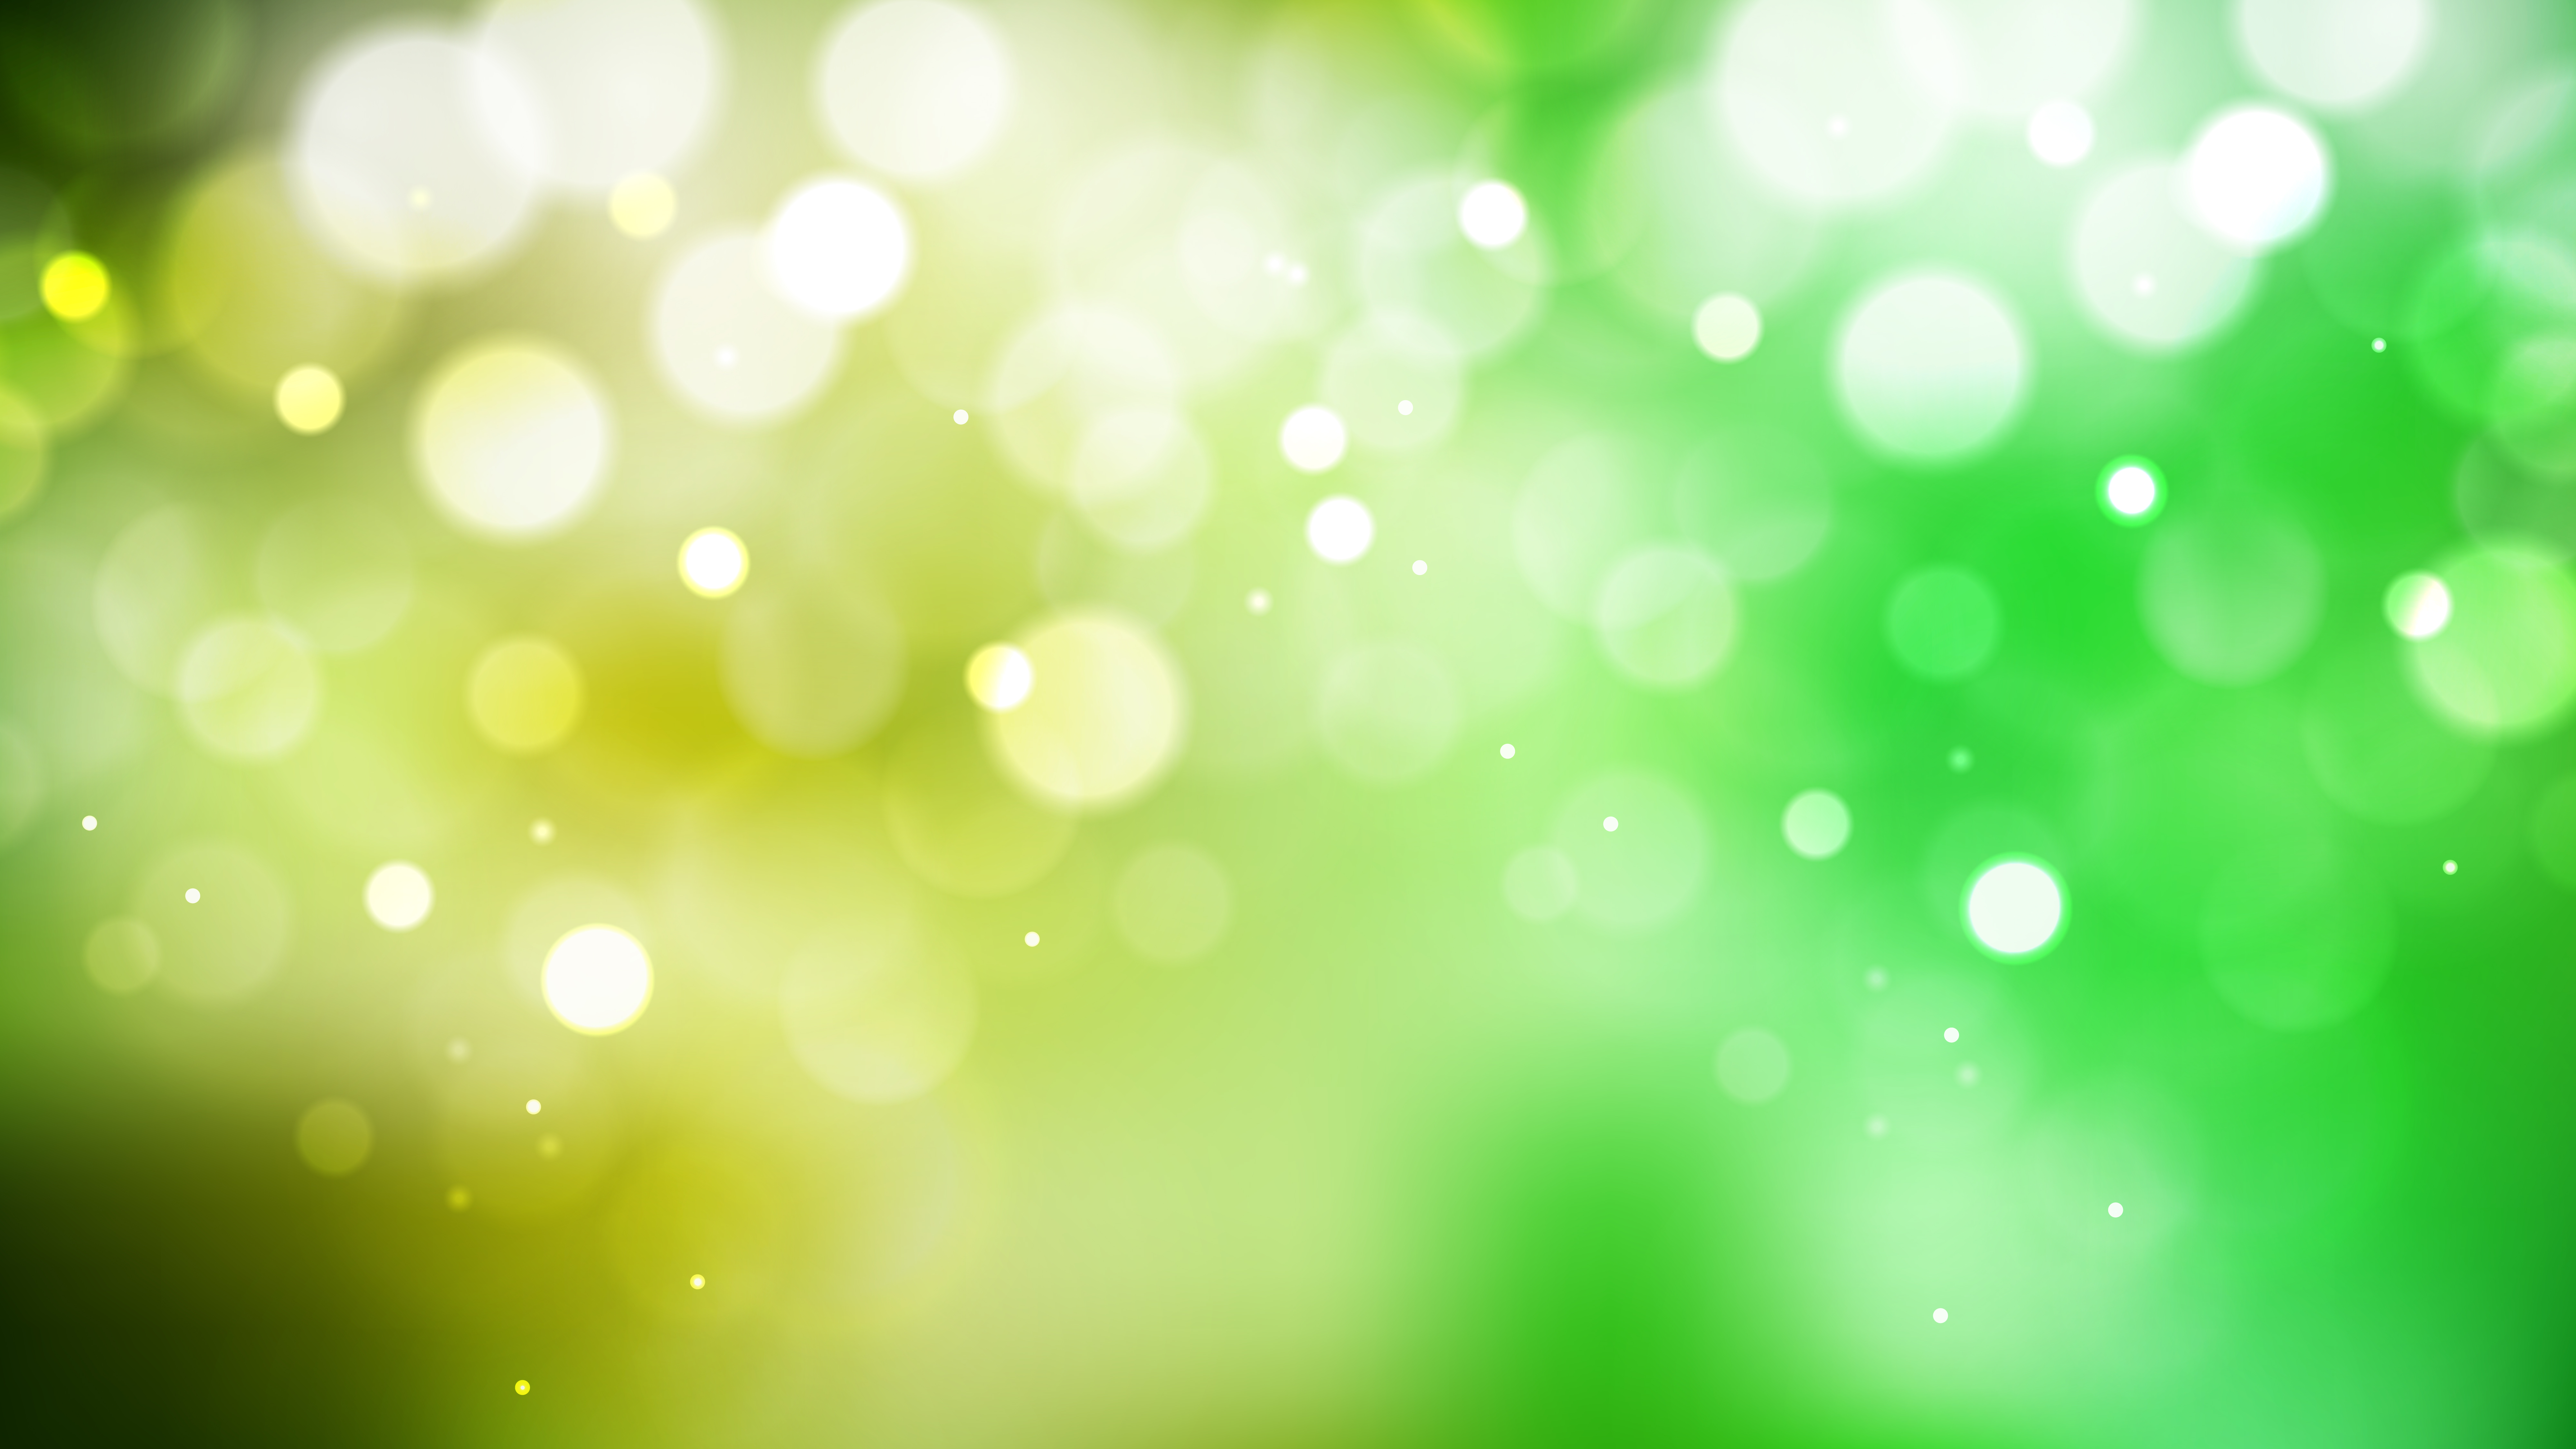 Free Abstract Green Yellow and White Defocused Lights Background Vector